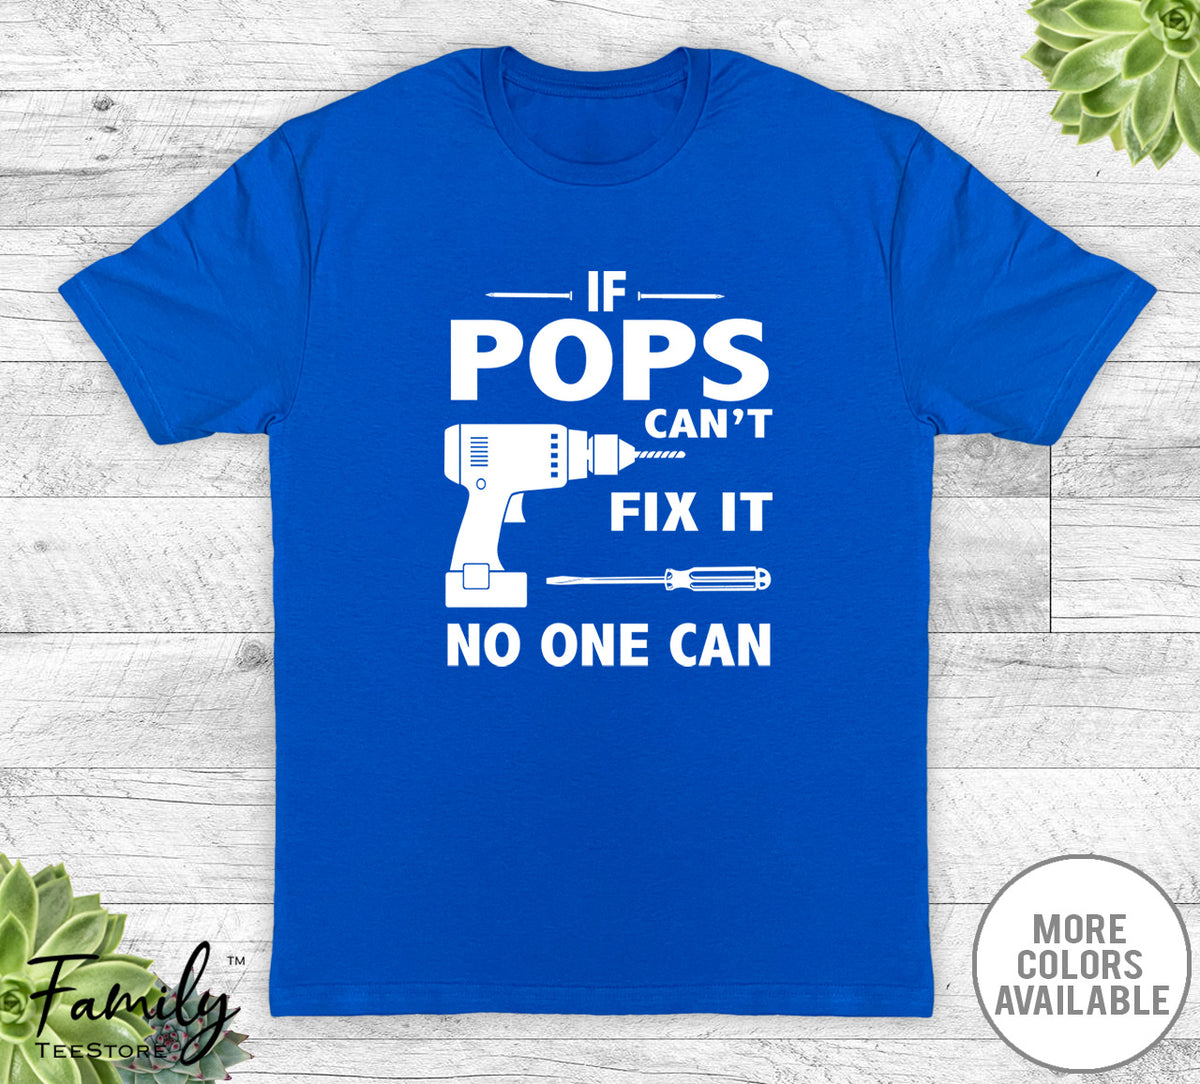 If Pops Can't Fix It No One Can - Unisex T-shirt - Pops Shirt - Pops Gift - familyteeprints